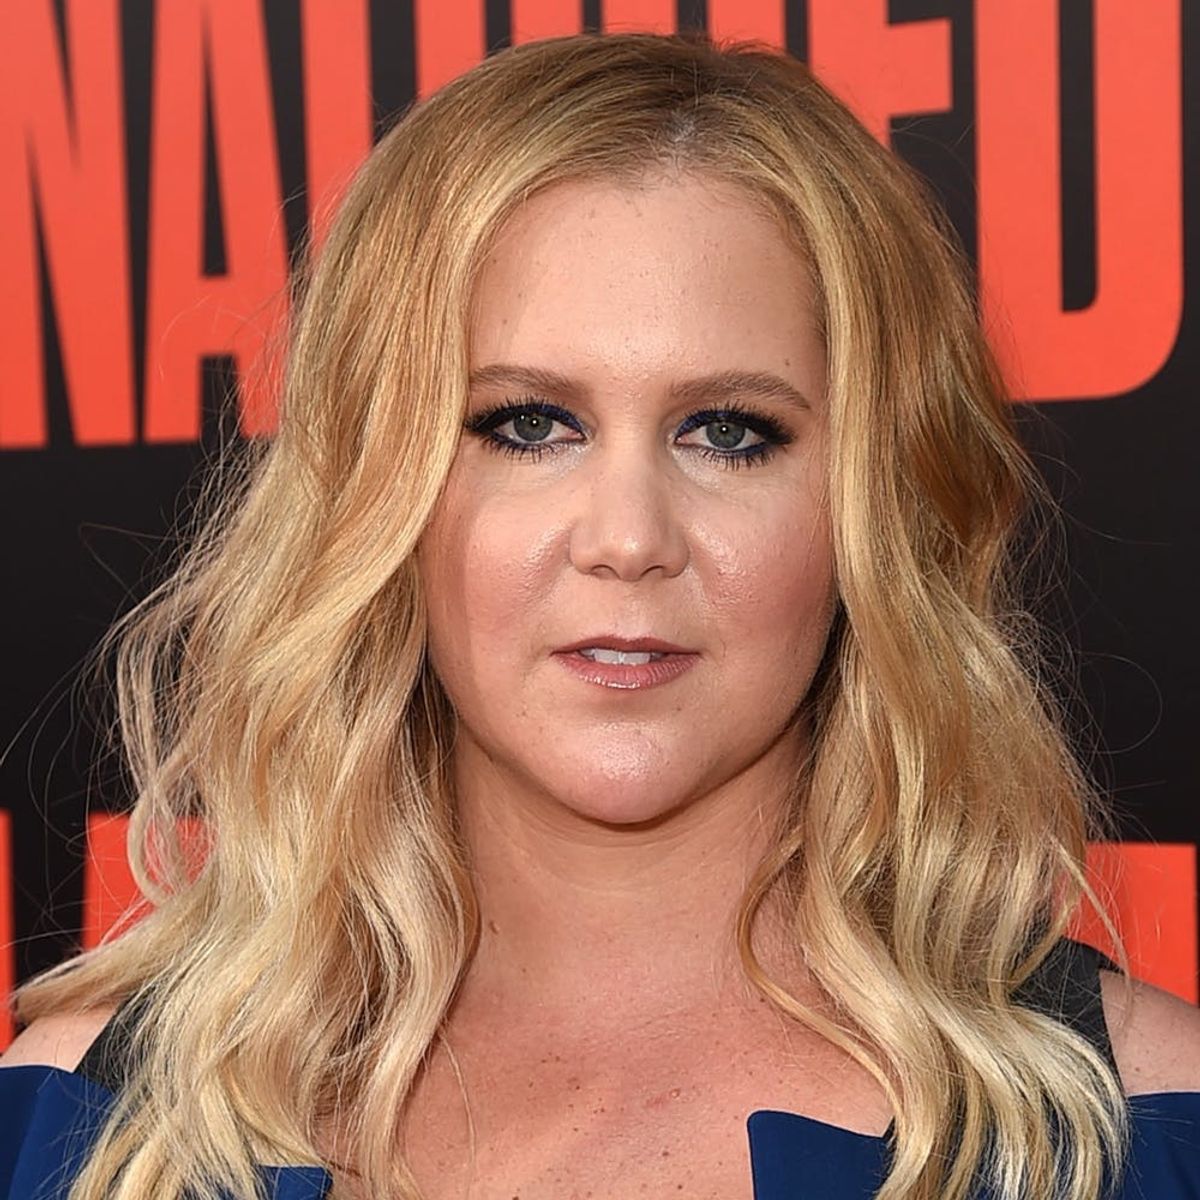 You Won’t Believe the Insane Tip Amy Schumer Just Left on an $80 Bill